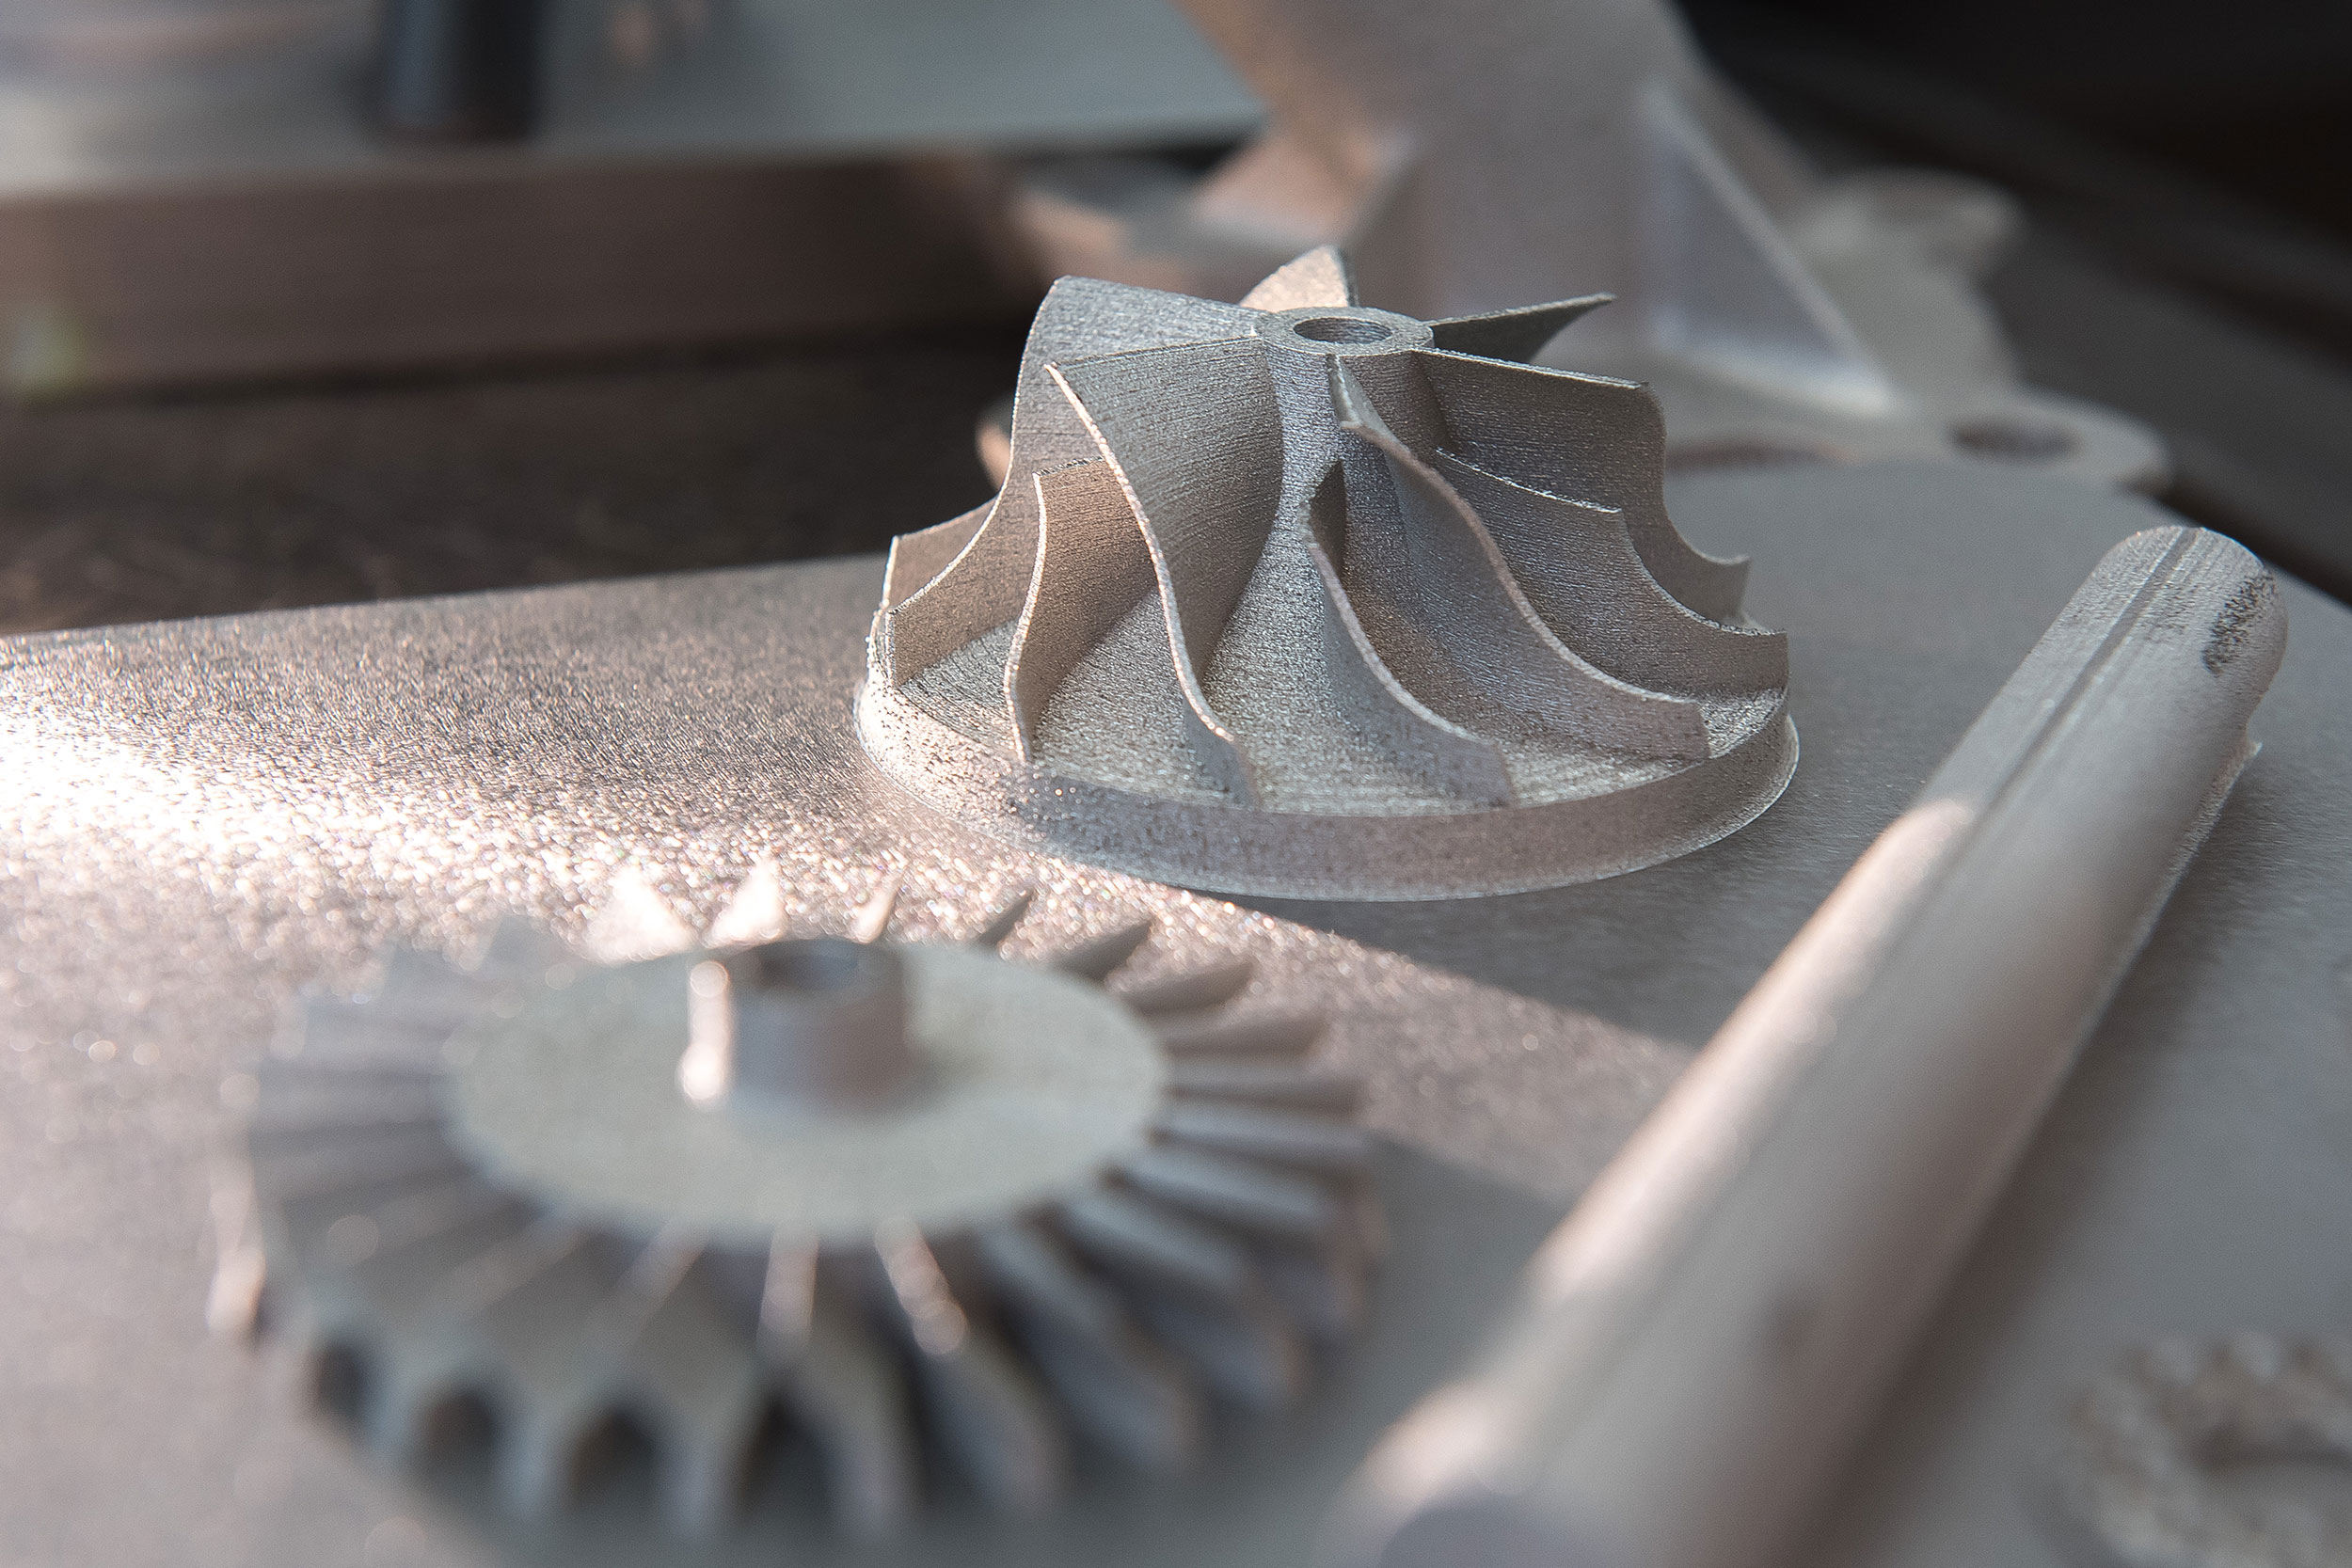 The AMNOW Program will yield a fully functional digital U.S. Army supply chain featuring metal additive manufacturing. Photo via the U.S. Army/David McNally.